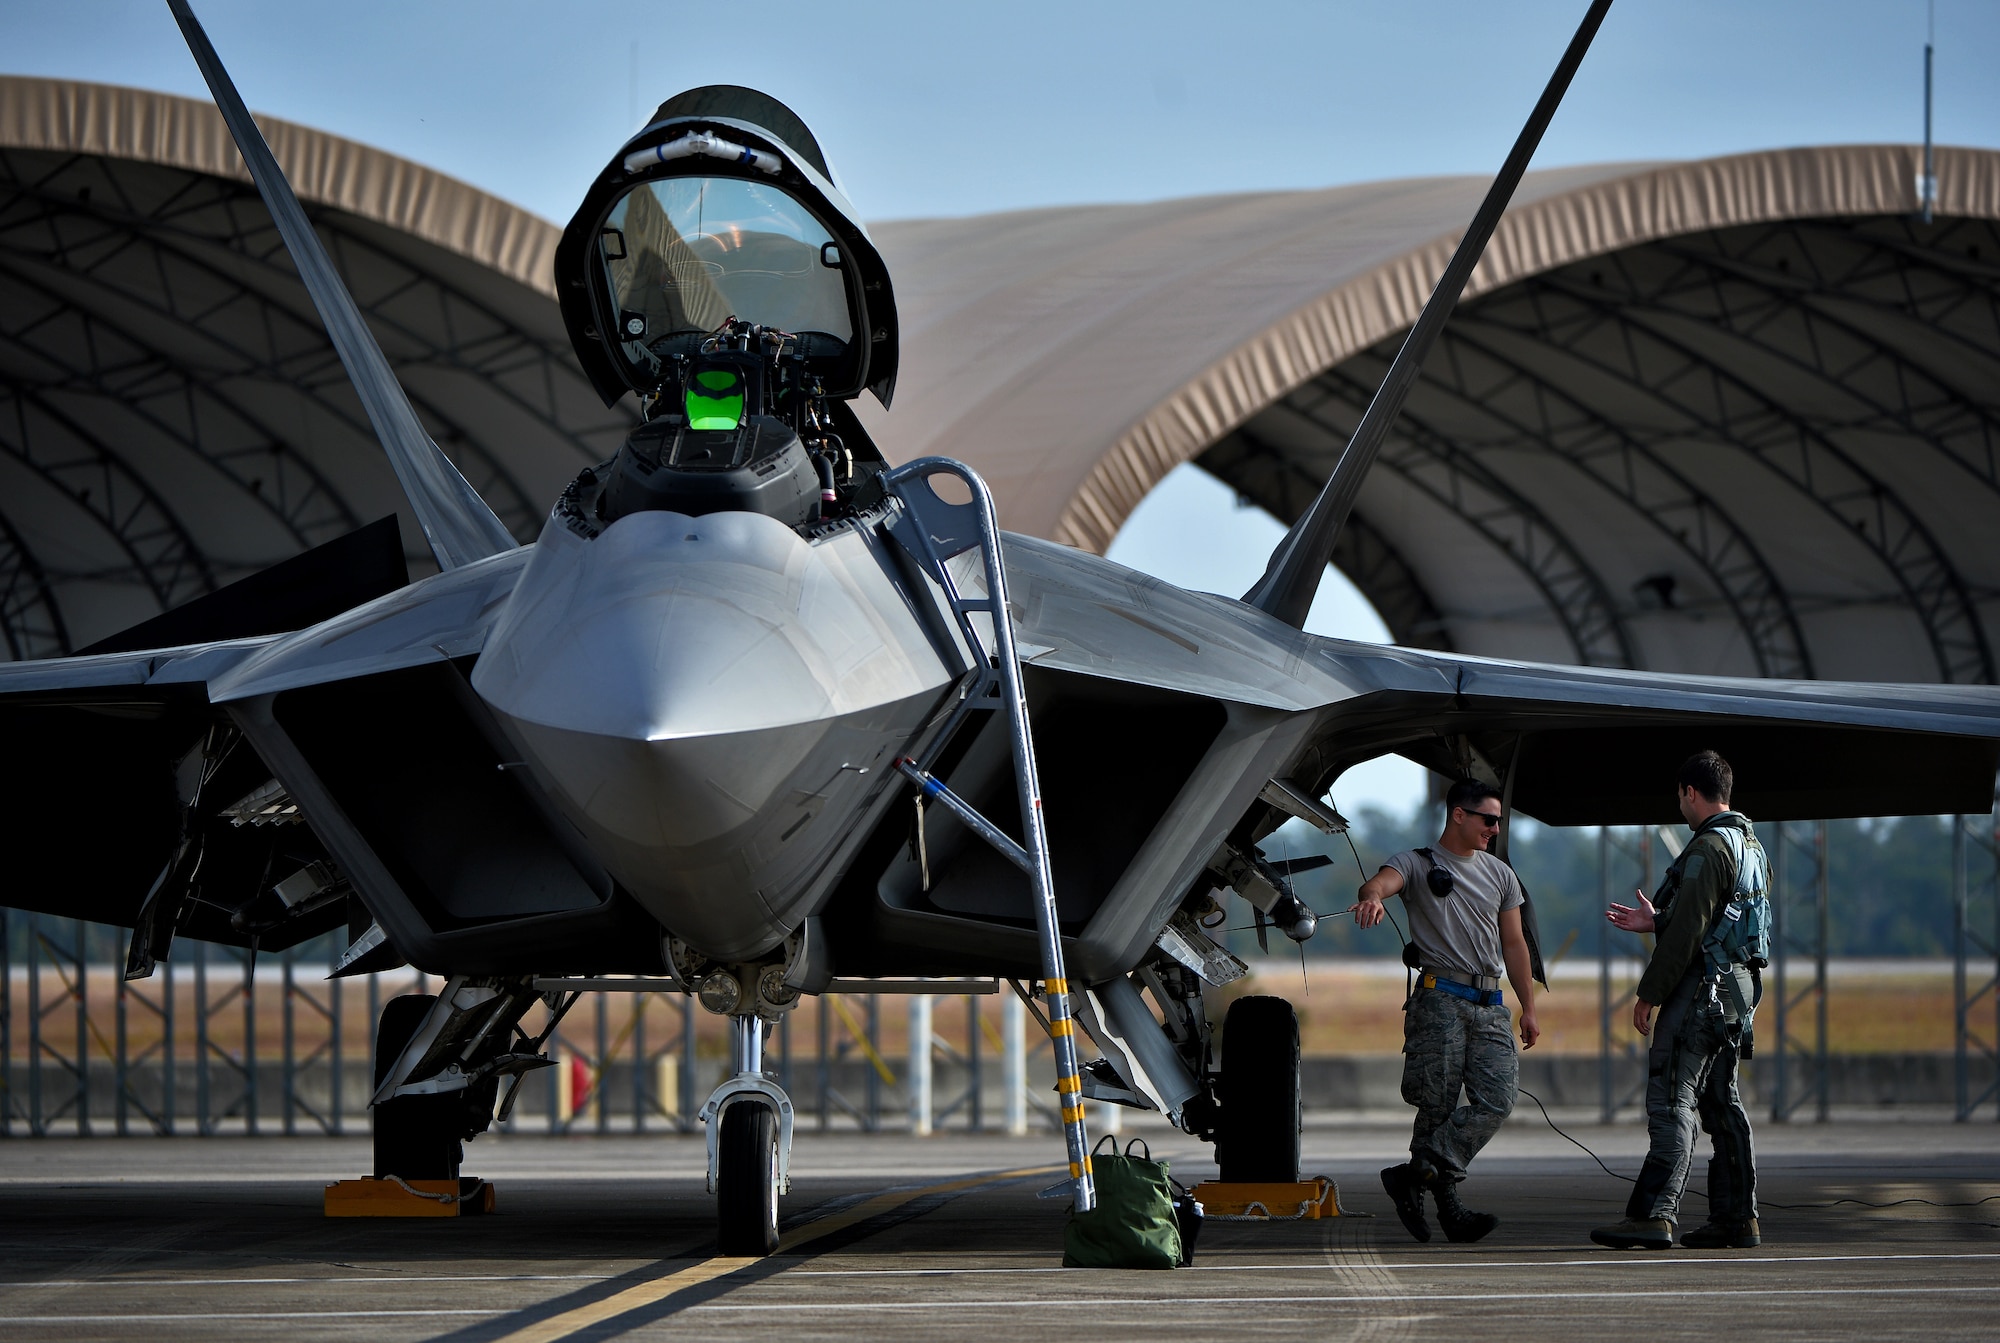 An F-22 Raptor from the 94th Fighter Squadron, Joint Base Langley-Eustis, Virginia, is ready for take-off for an integrated training mission on Eglin Air Force Base, Florida, Nov. 6, 2014. The F-35s and F-22s flew offensive counter air, defensive counter air and interdiction missions, maximizing effects by employing fifth-generation capabilities together. (U.S. Air Force photo/Master Sgt. Shane A. Cuomo)